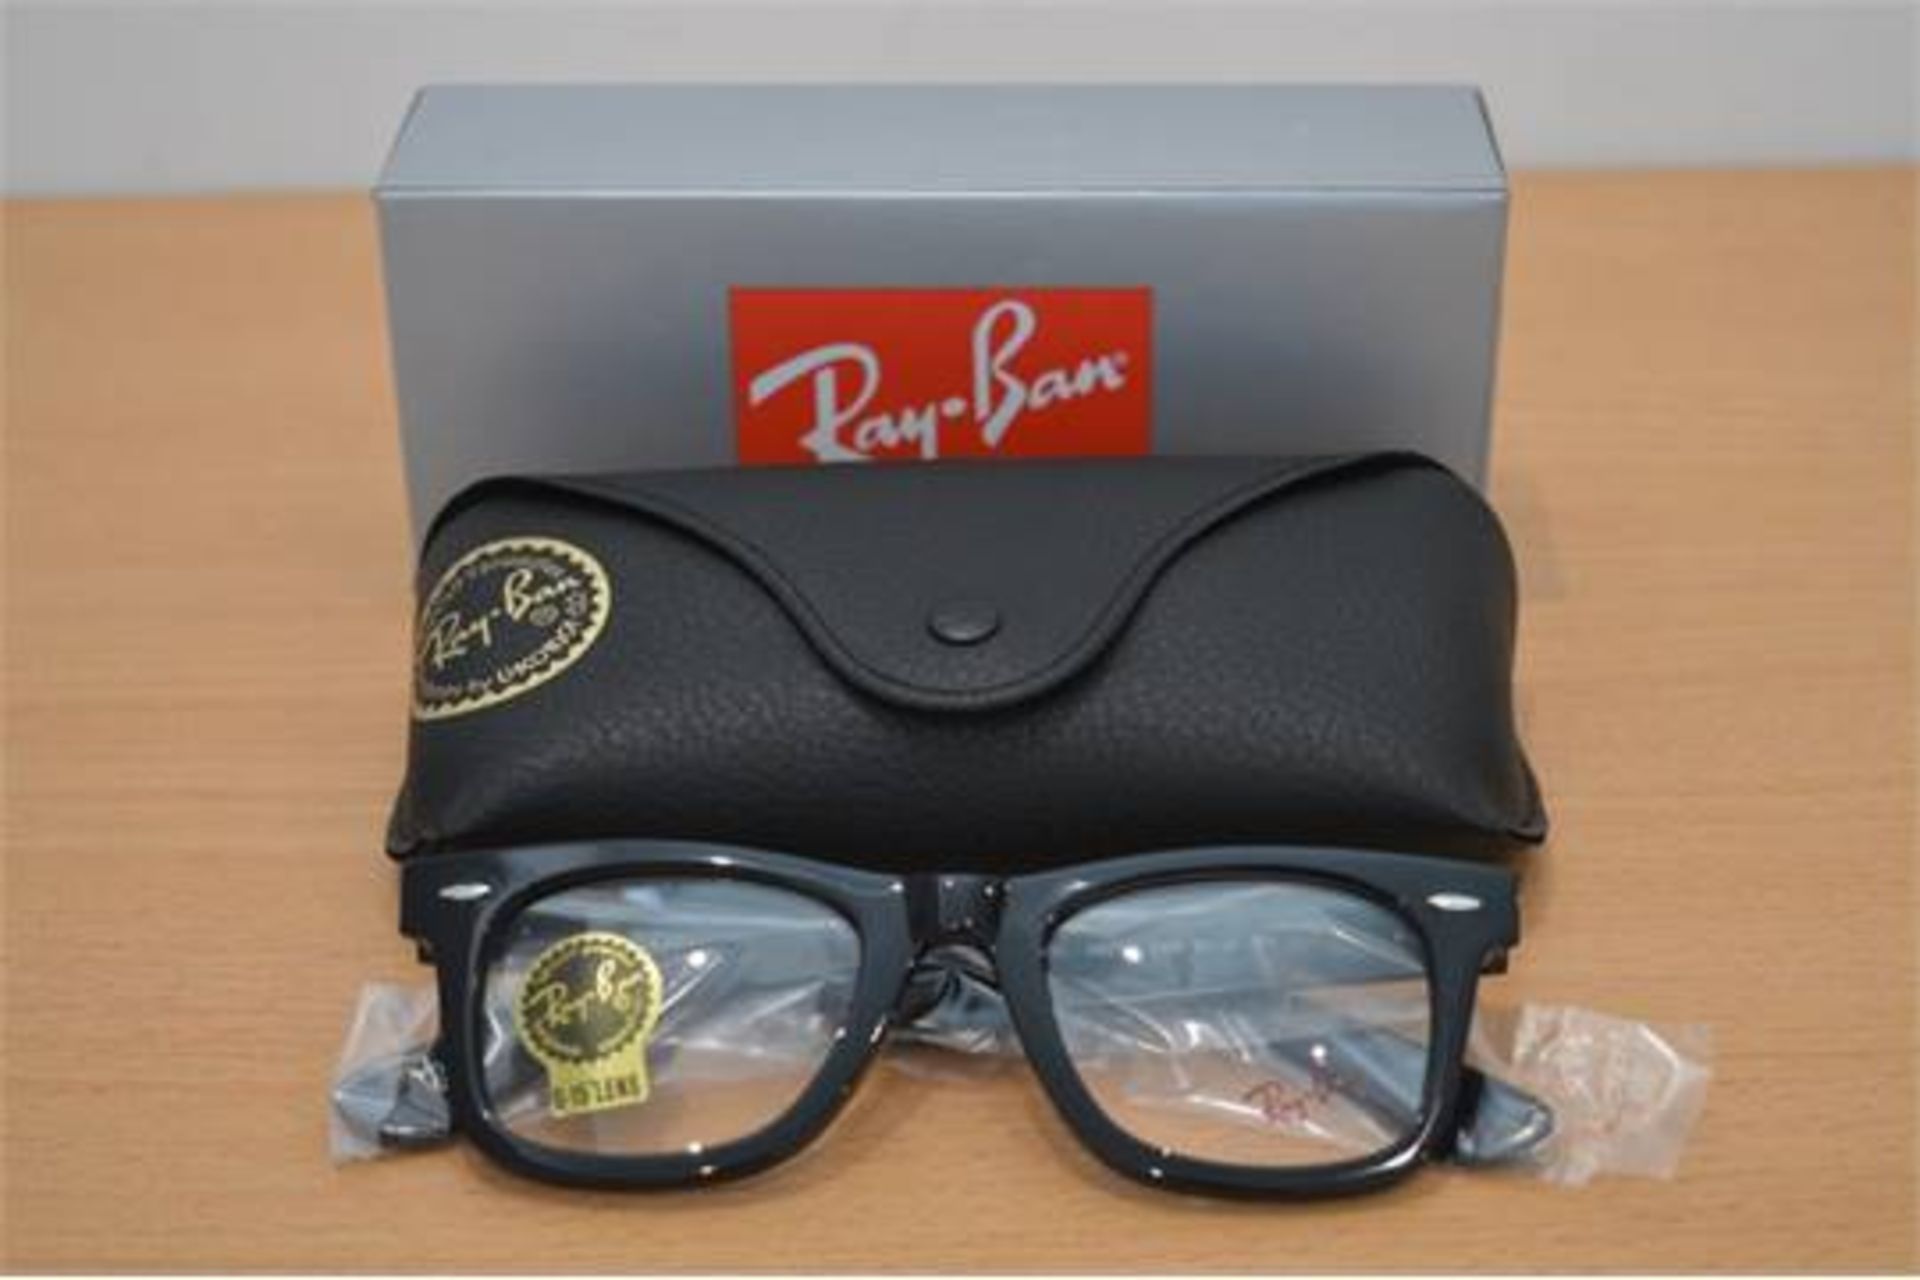 BOXED BRAND NEW RAYBAN BLACK GLOSS AND CLEAR LENS UNISEX DESIGNER SUNGLASSES RRP £169.99 (MD-